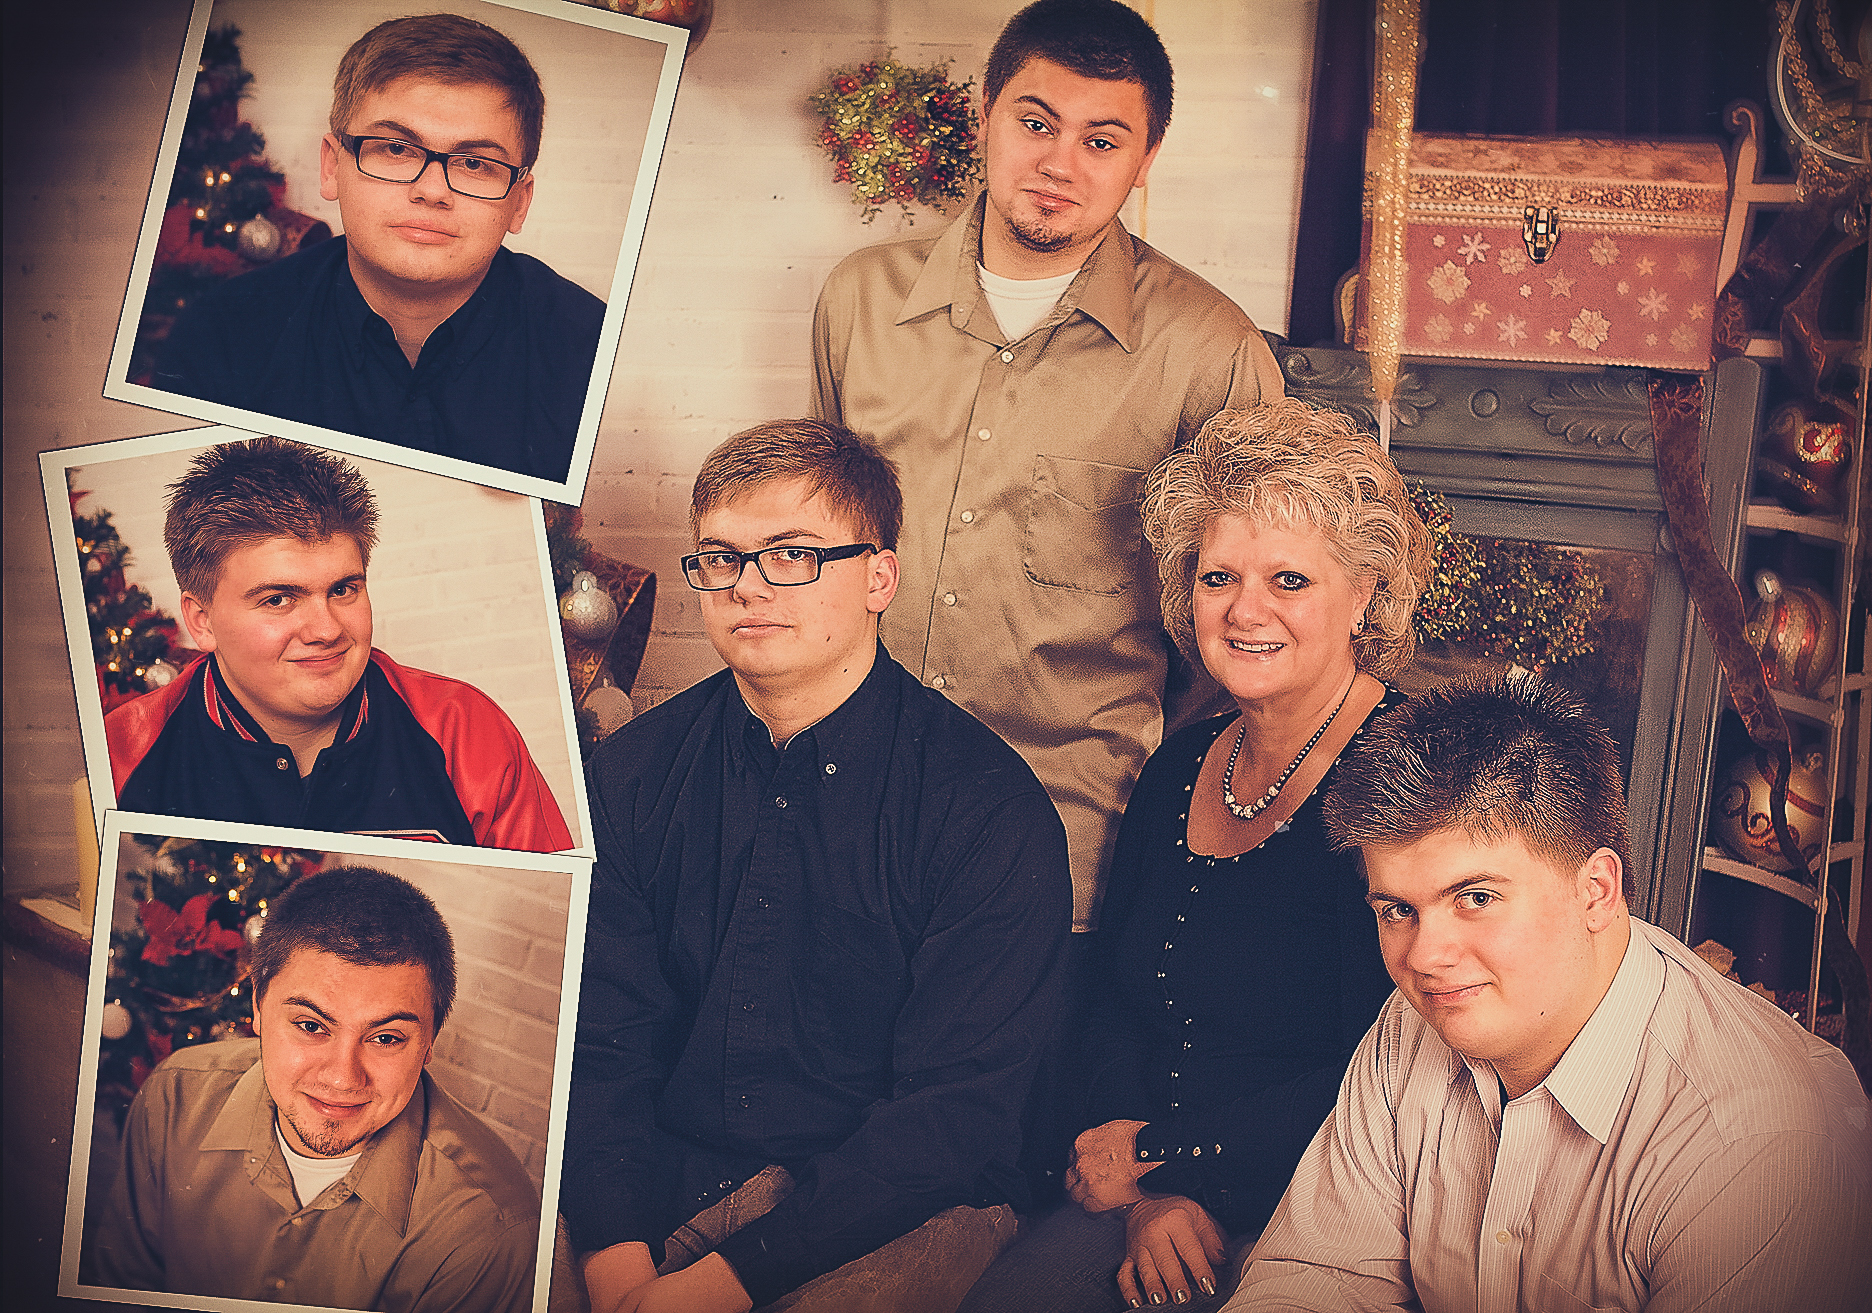 glimmer glass photography offers family portrait specials for Christmas